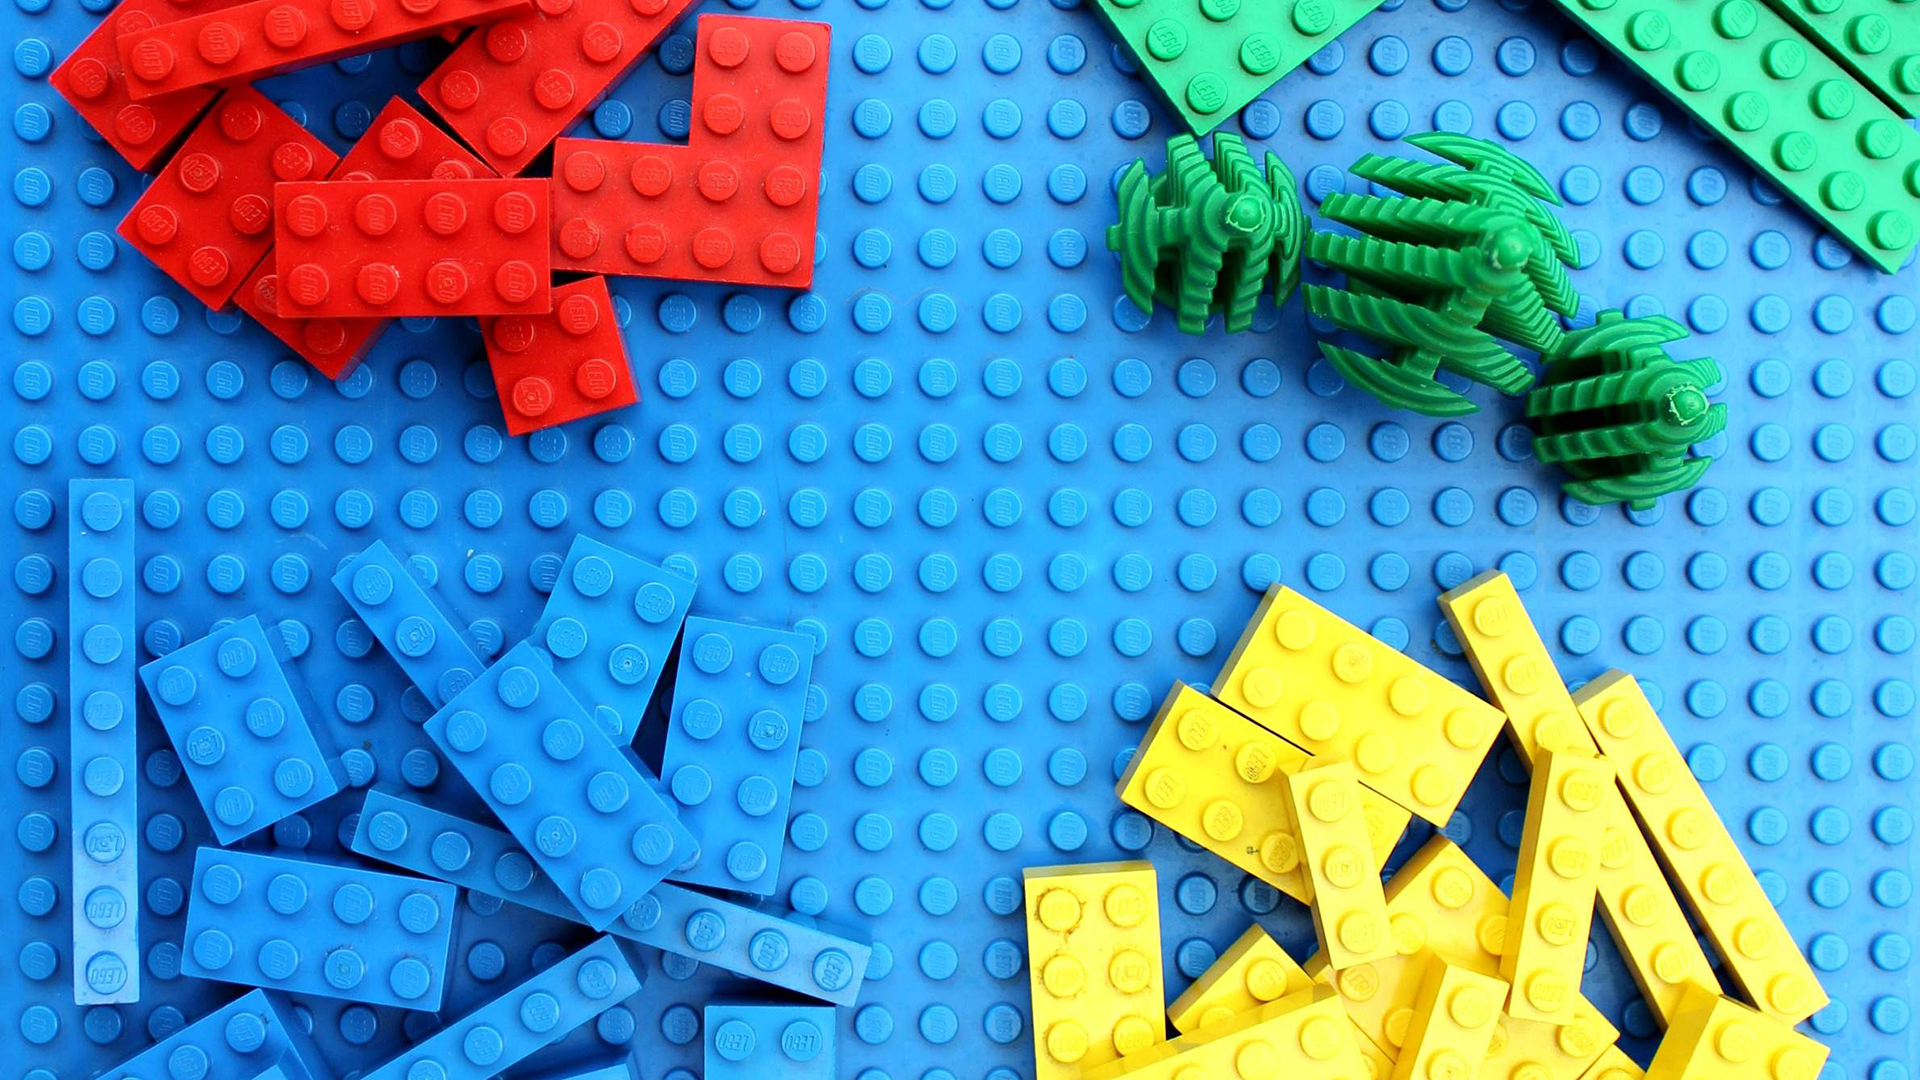 lego blocks stacked in piles by color